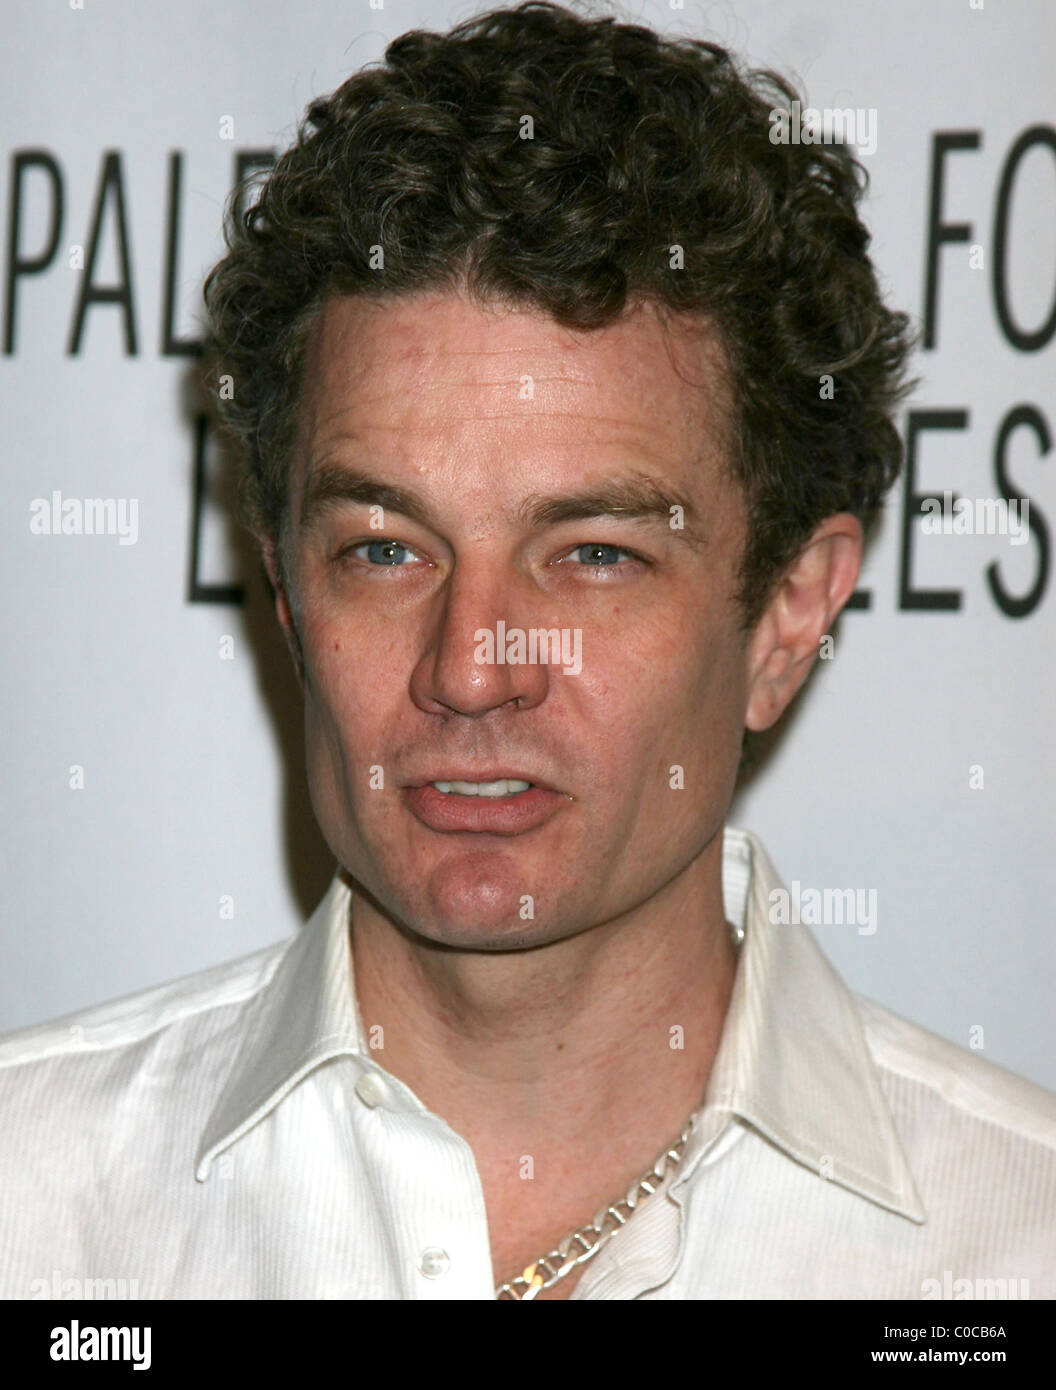 James Marsters 'Buffy the Vampire Slayer' reunion for the Paley Center for Media's 24th William S. Paley Television Festival Stock Photo